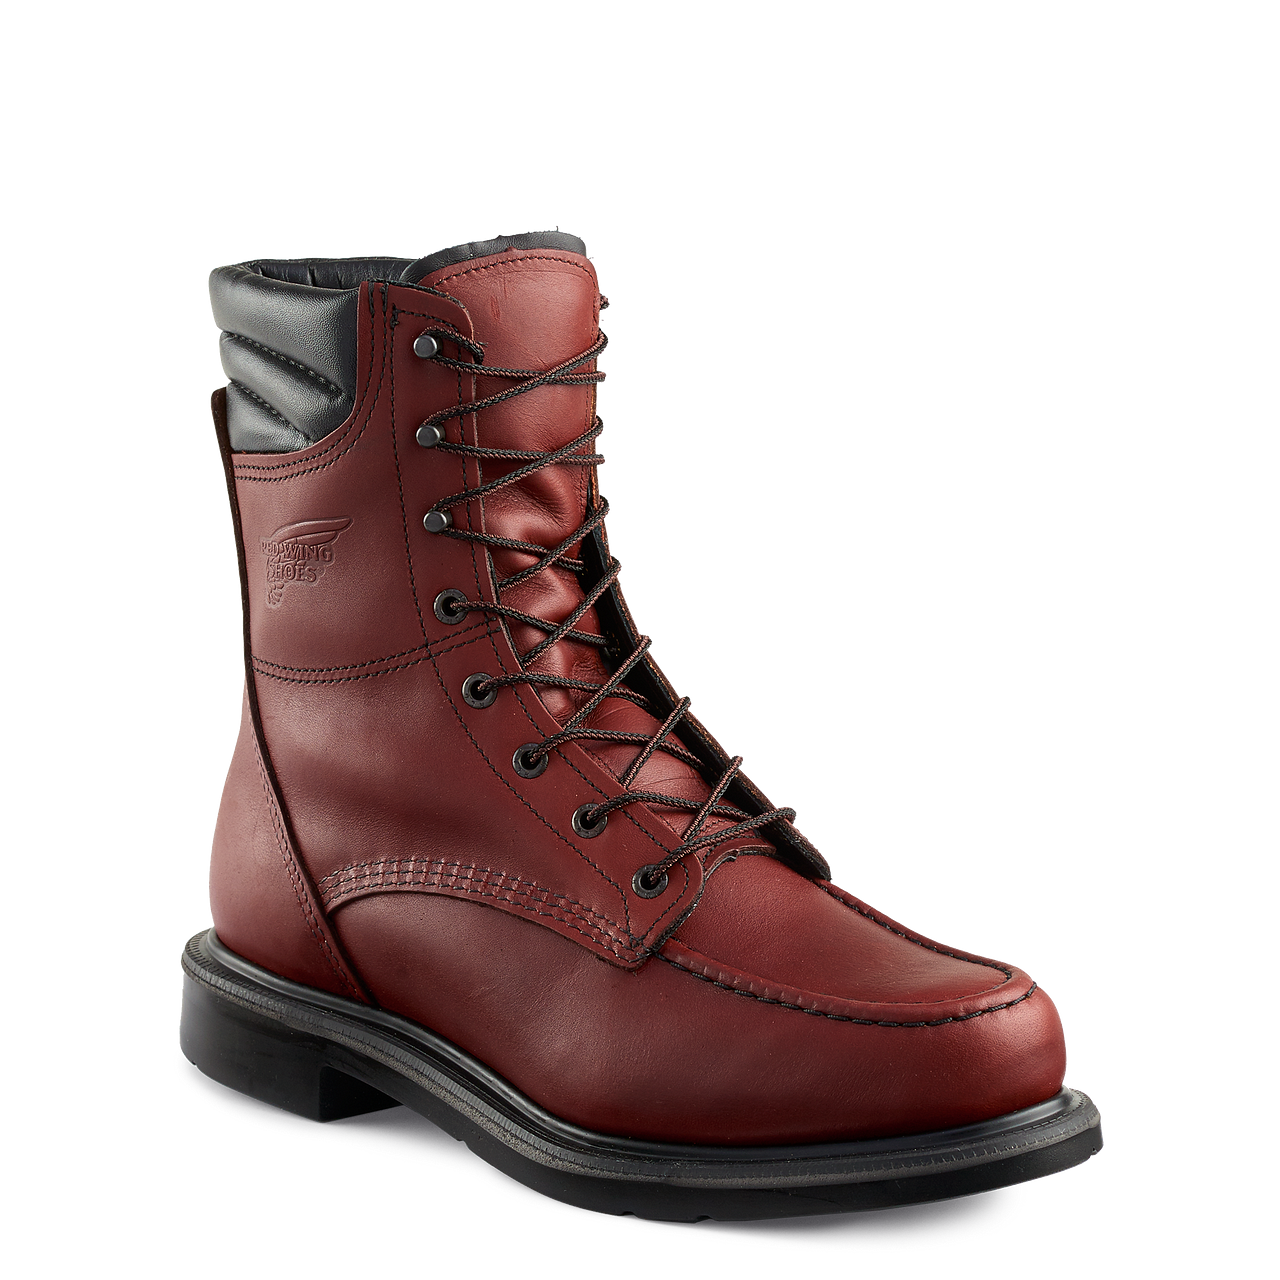 Red Wing 402 SuperSole 8-Inch Soft Toe Boot